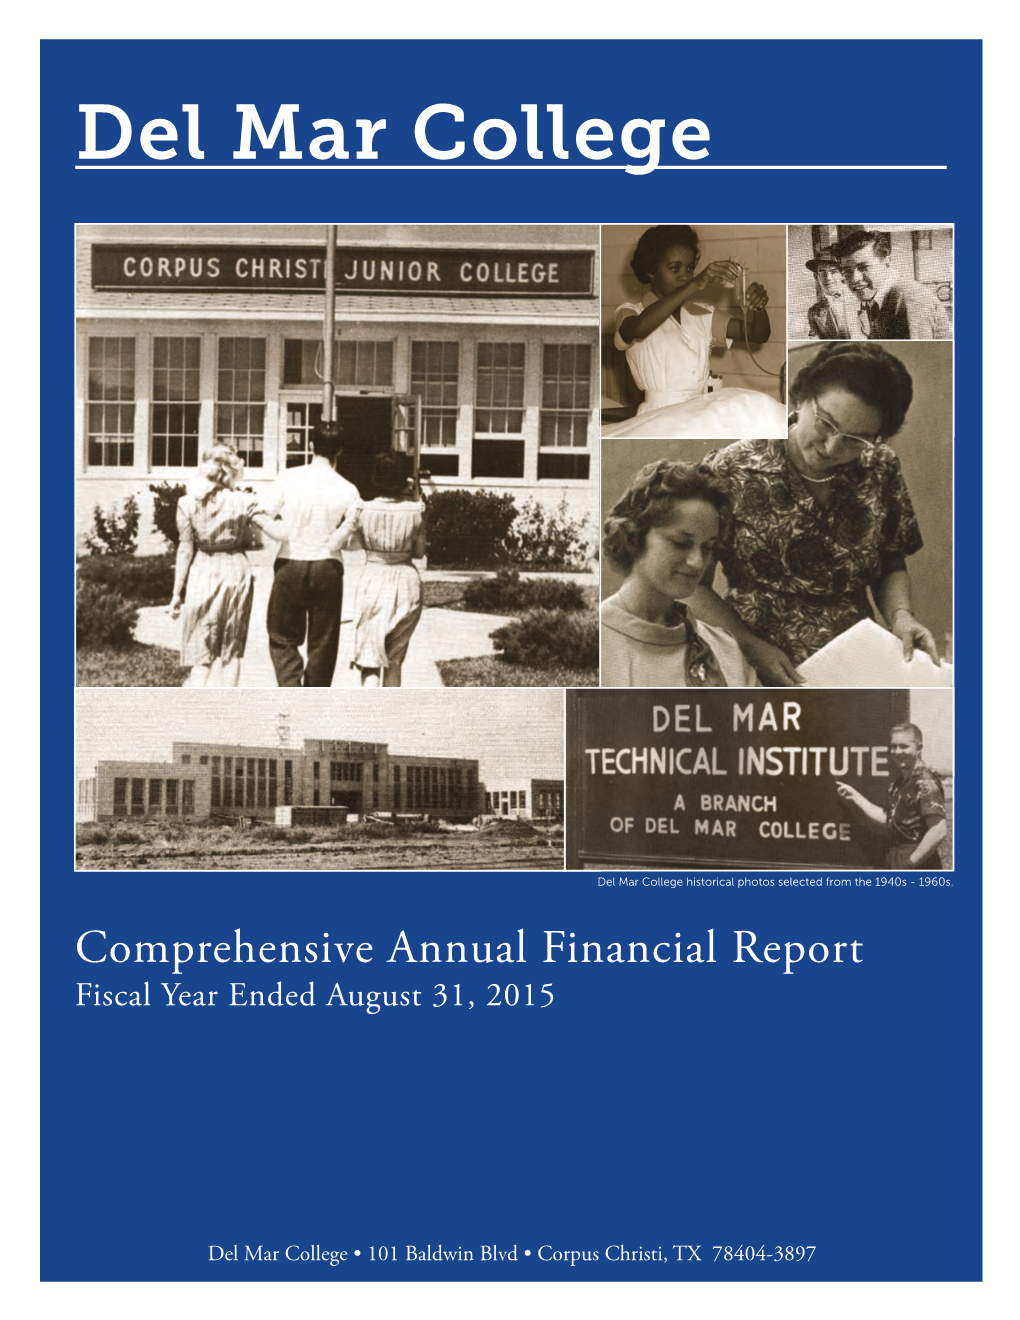 Comprehensive Annual Financial Report Fiscal Year Ended August 31, 2015